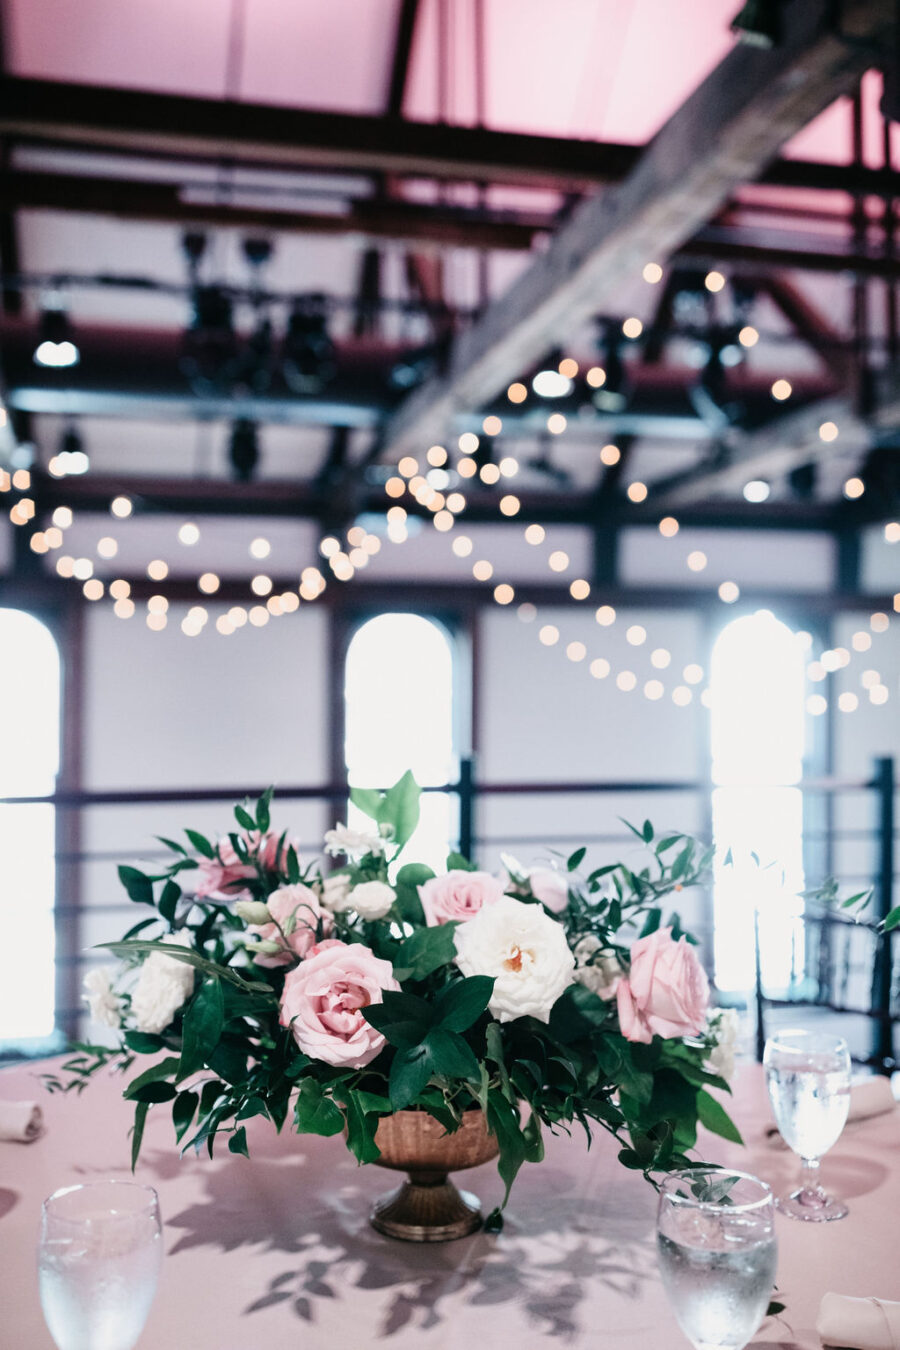 Weekday Wedding at The Bell Tower featured on Nashville Bride Guide